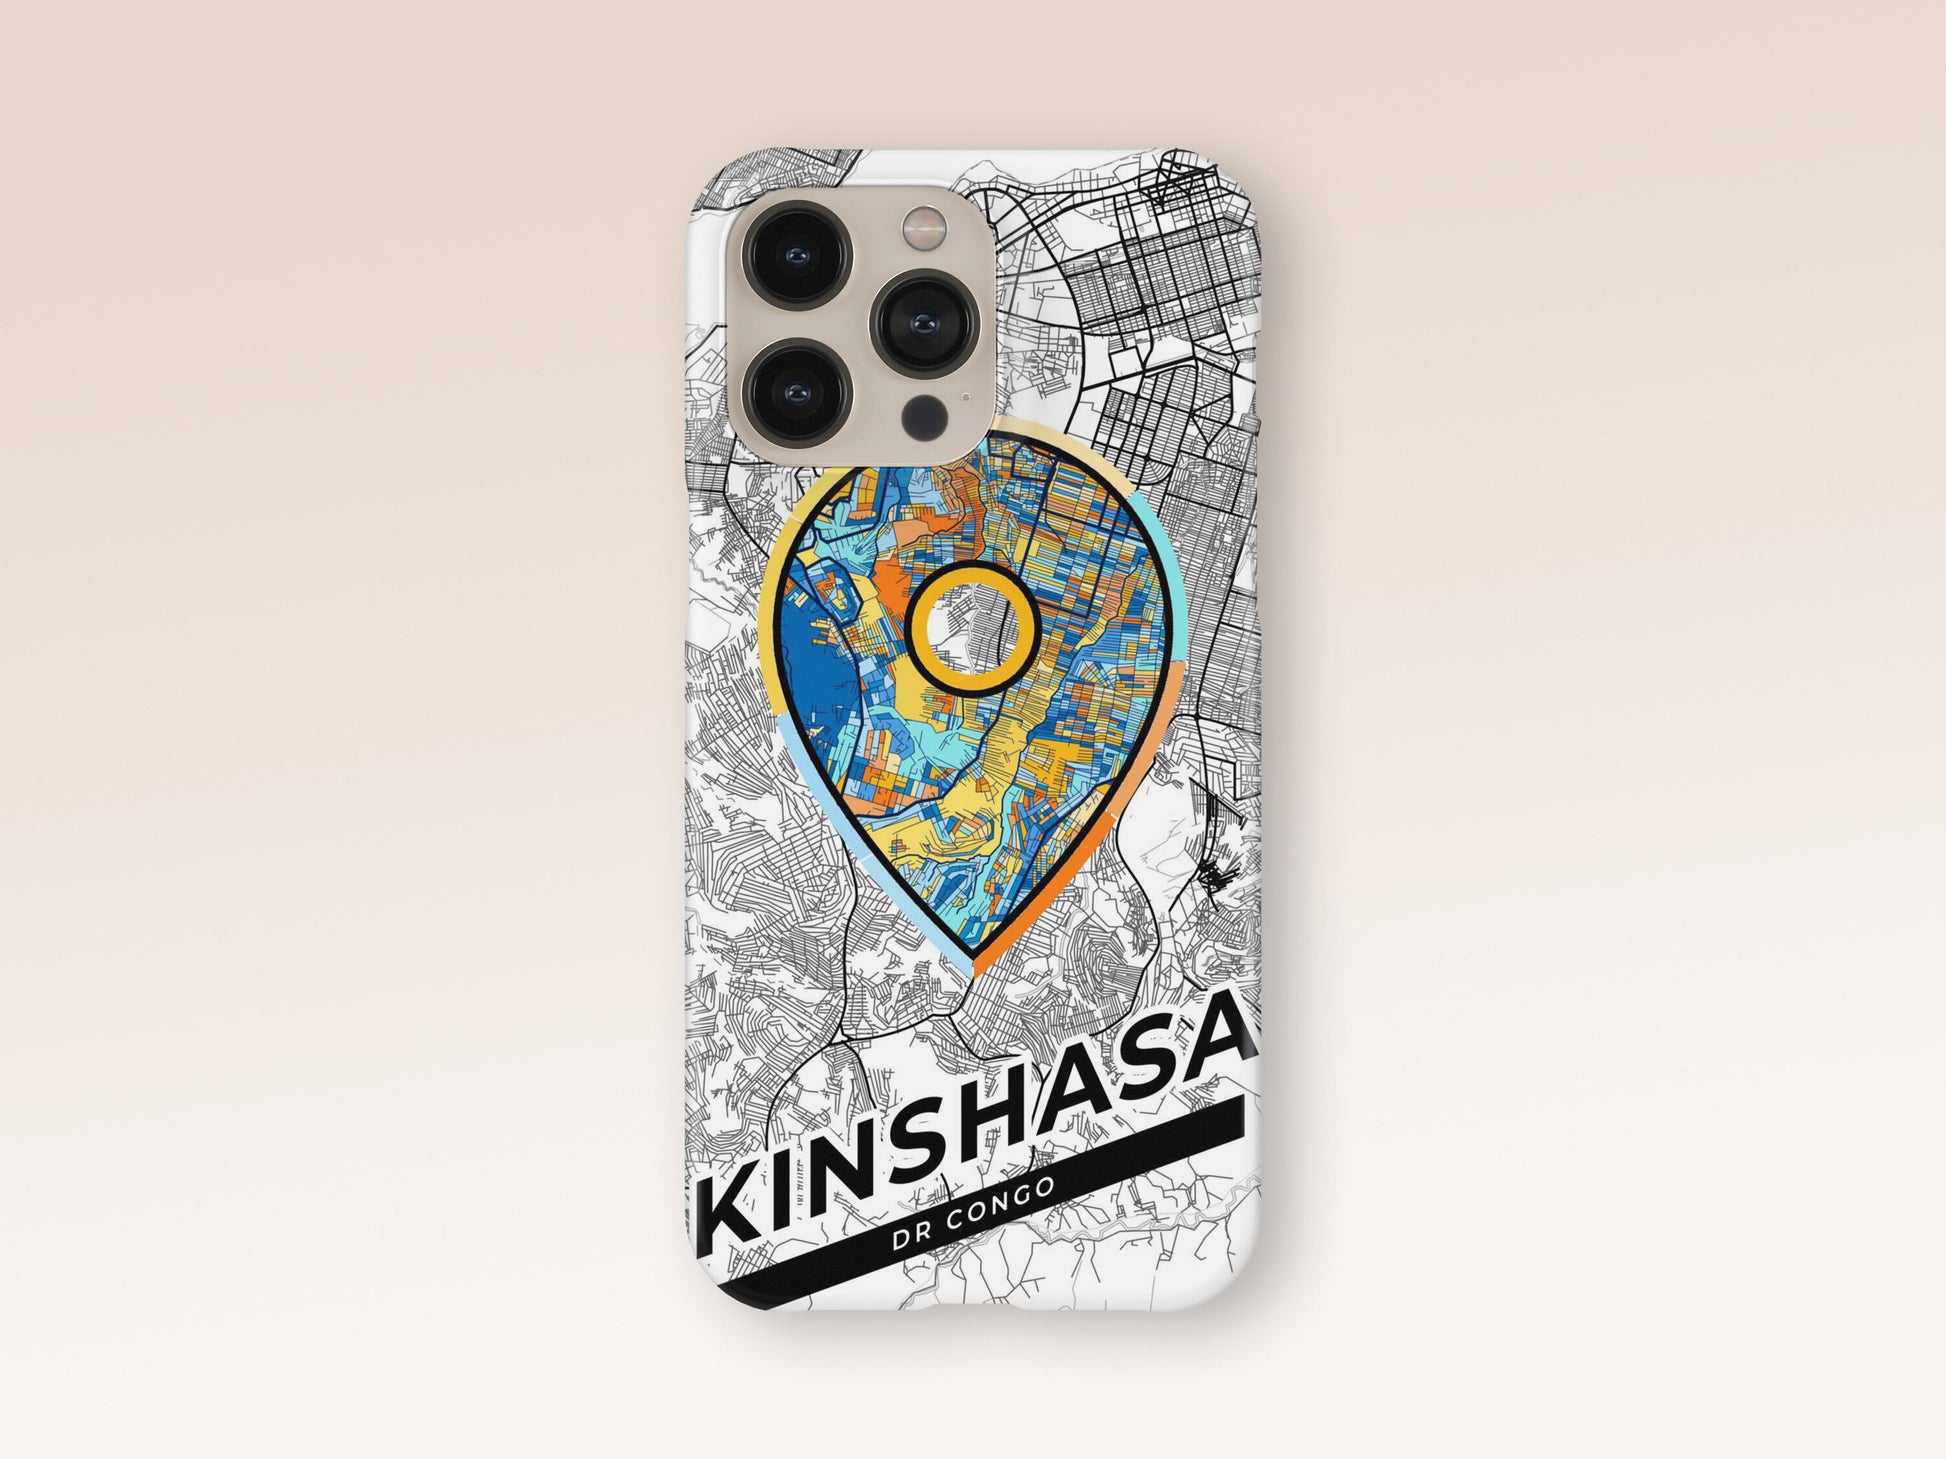 Kinshasa Dr Congo slim phone case with colorful icon. Birthday, wedding or housewarming gift. Couple match cases. 1